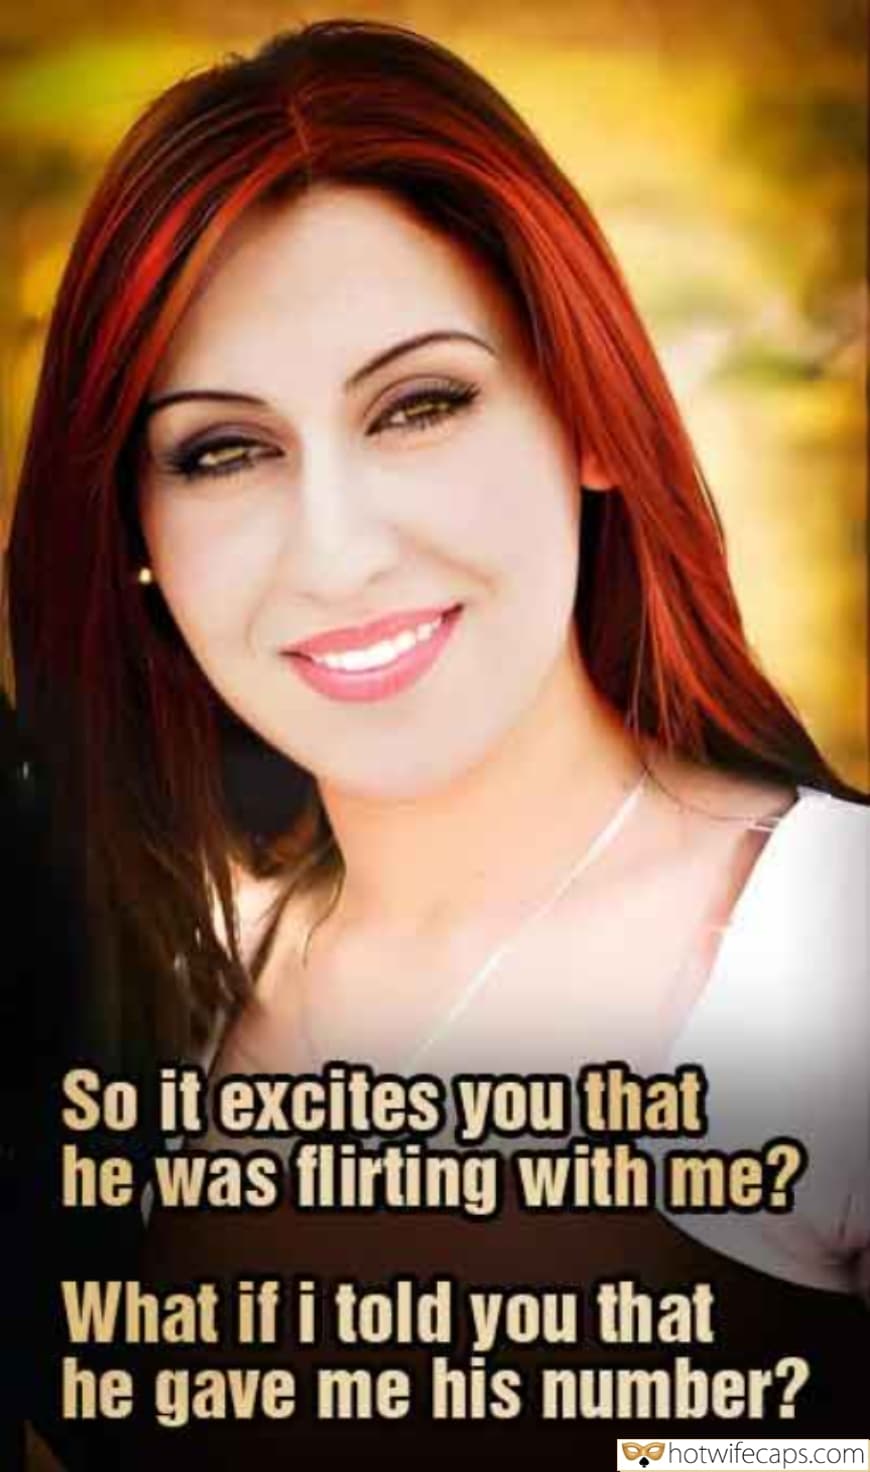 Dirty Talk Cheating Bull hotwife caption: So it excites you that he was flirting with me? What if i told you that he gave me his number? hotwifecaps.com He Makes Your Redhead Wife Horny